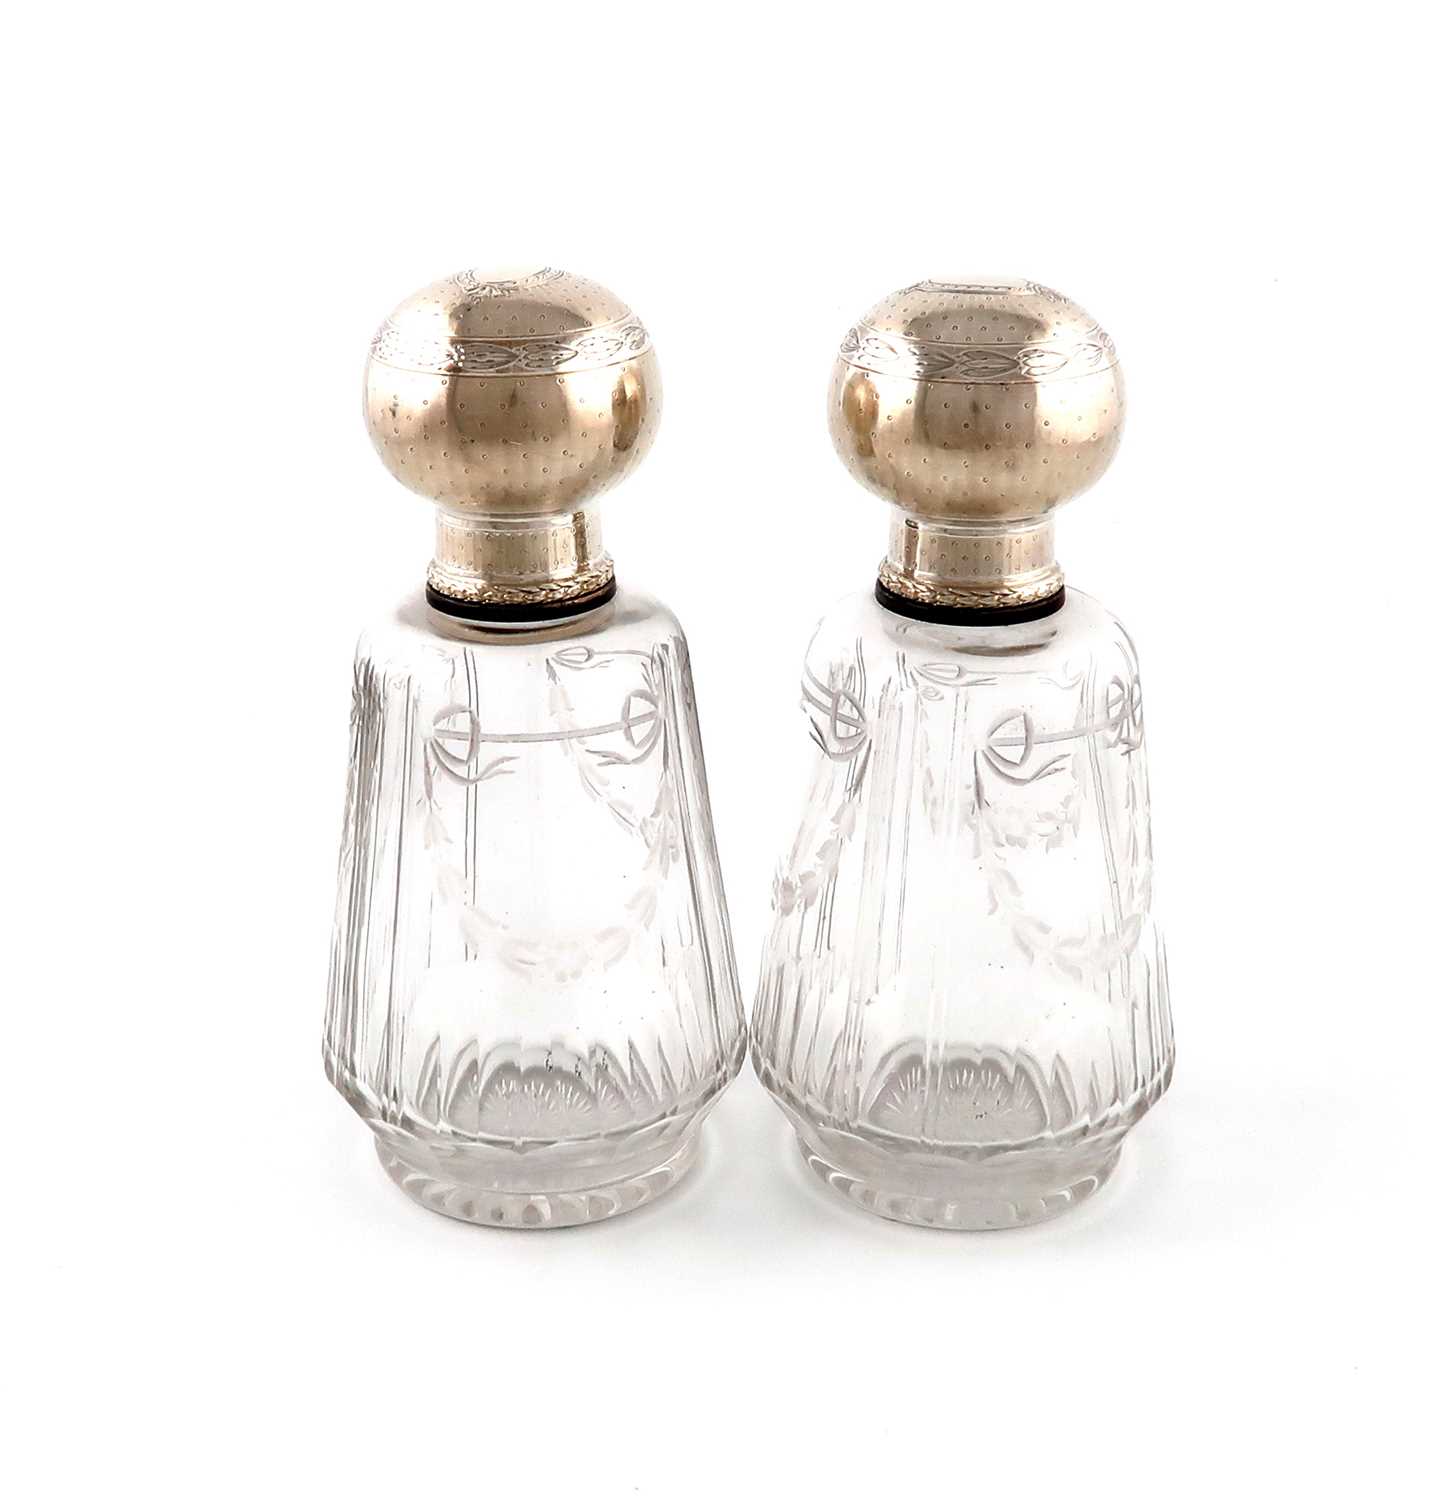 A large pair of French silver-mounted glass scent bottles,maker's mark of J.G in a lozenge,